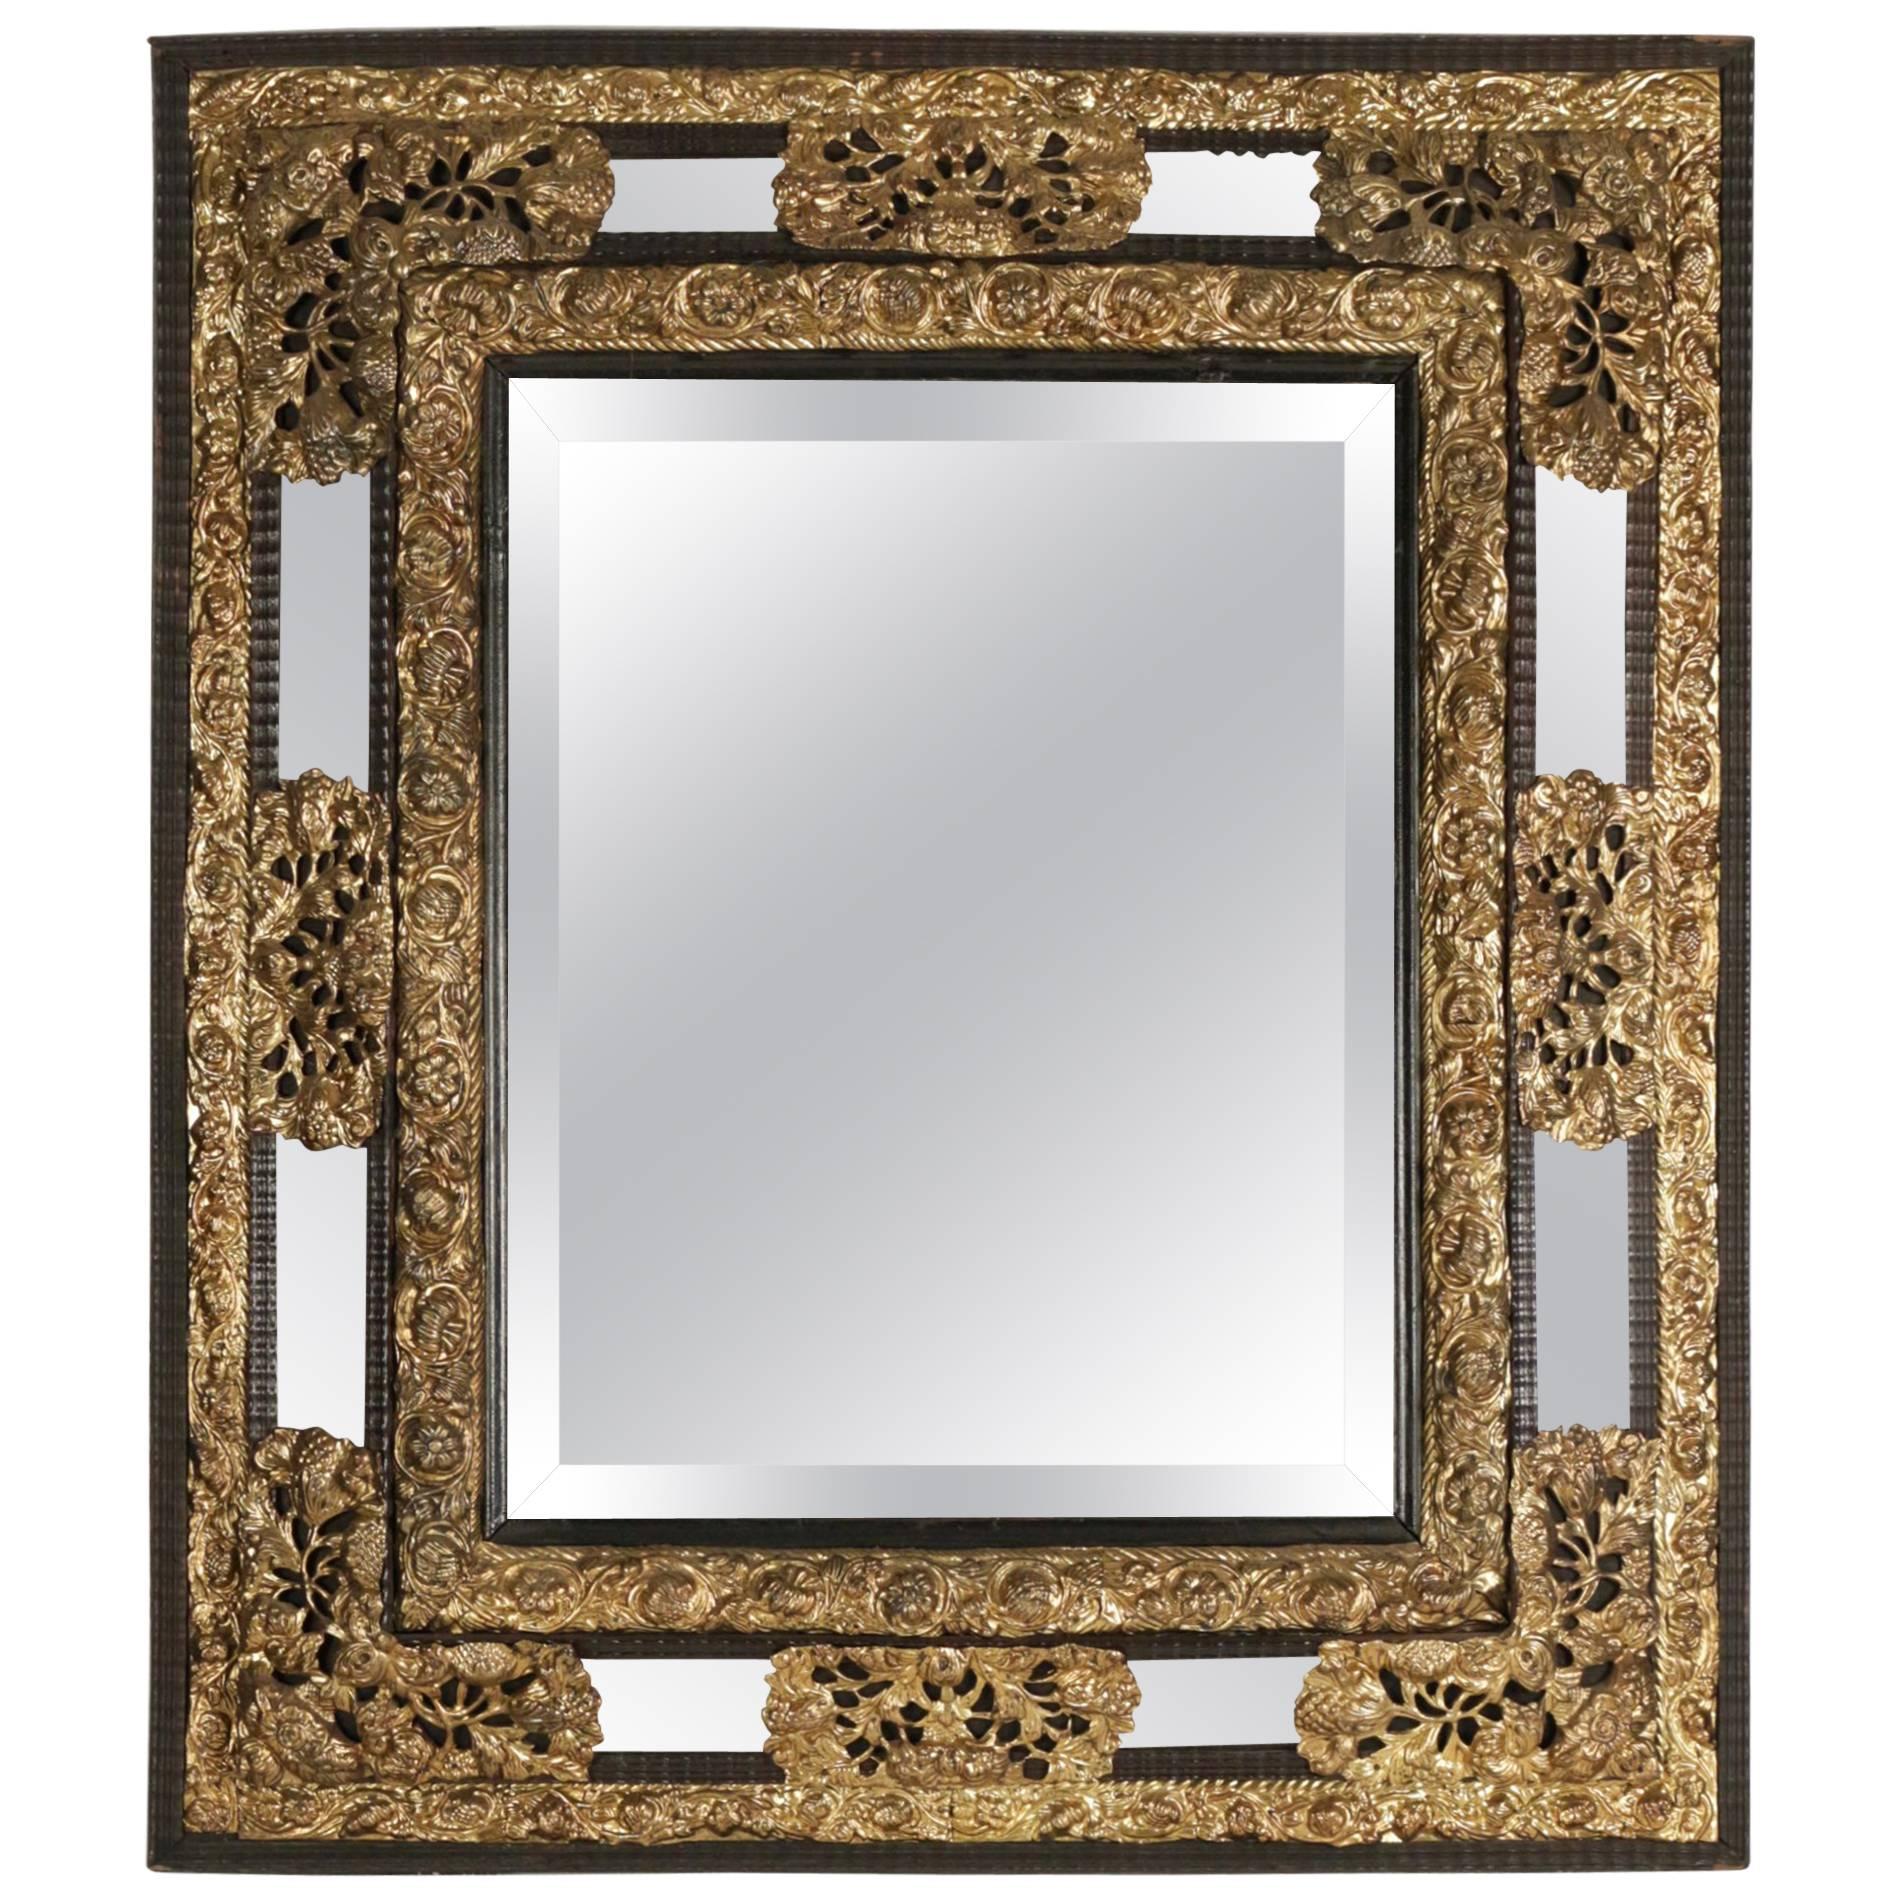 Parclose Mirror from the 19th Century in Gold Gilt Brass and Ebonized Wood